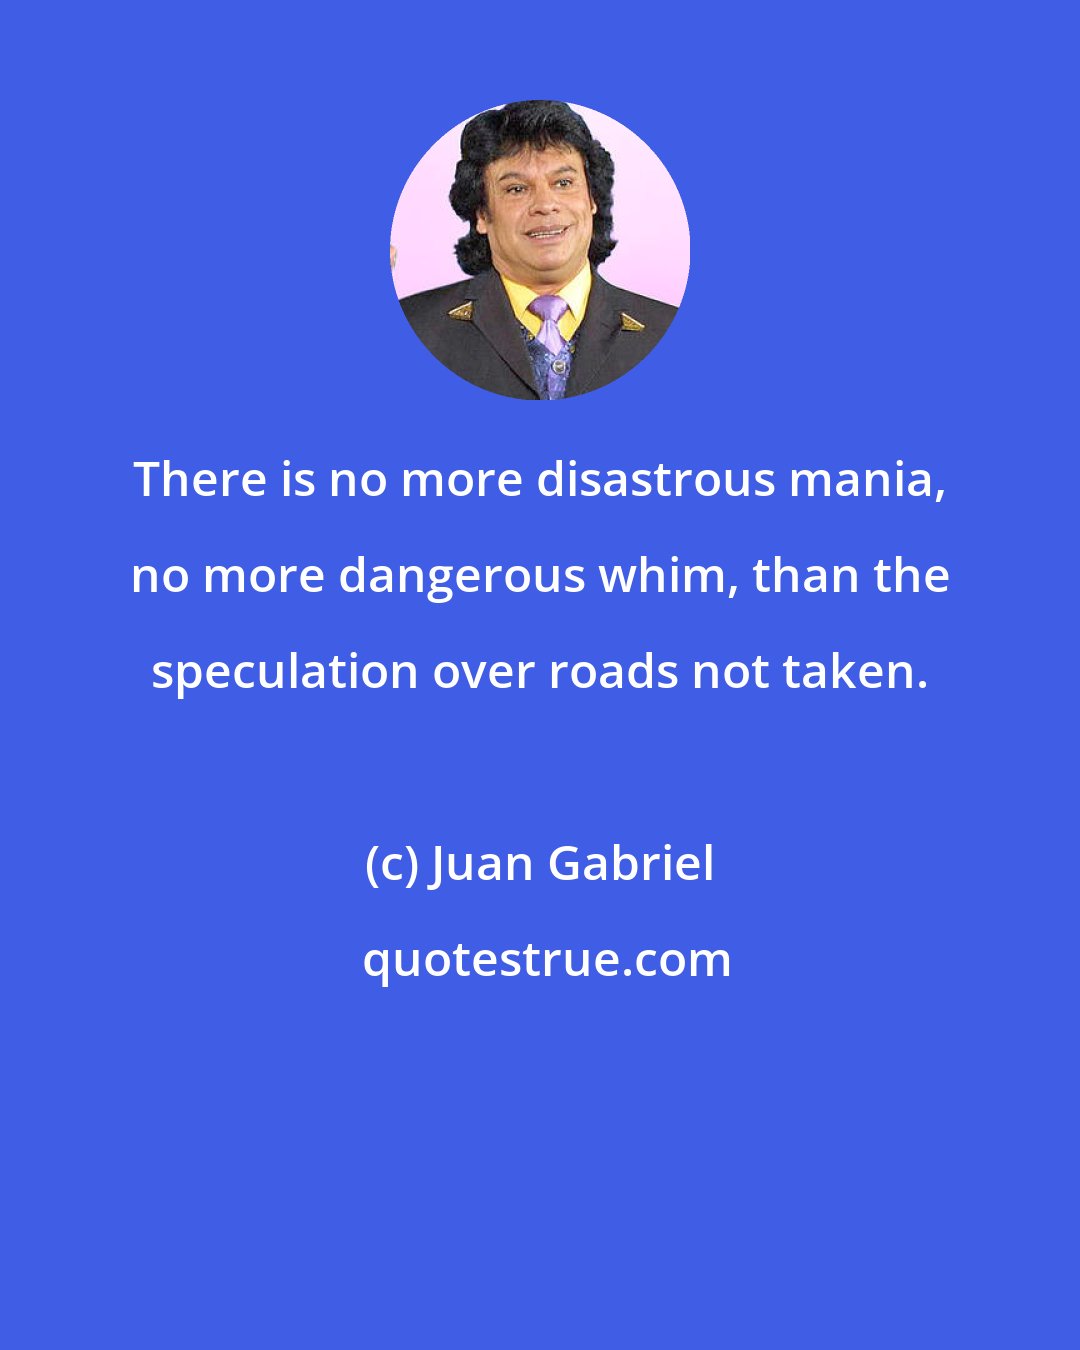 Juan Gabriel: There is no more disastrous mania, no more dangerous whim, than the speculation over roads not taken.